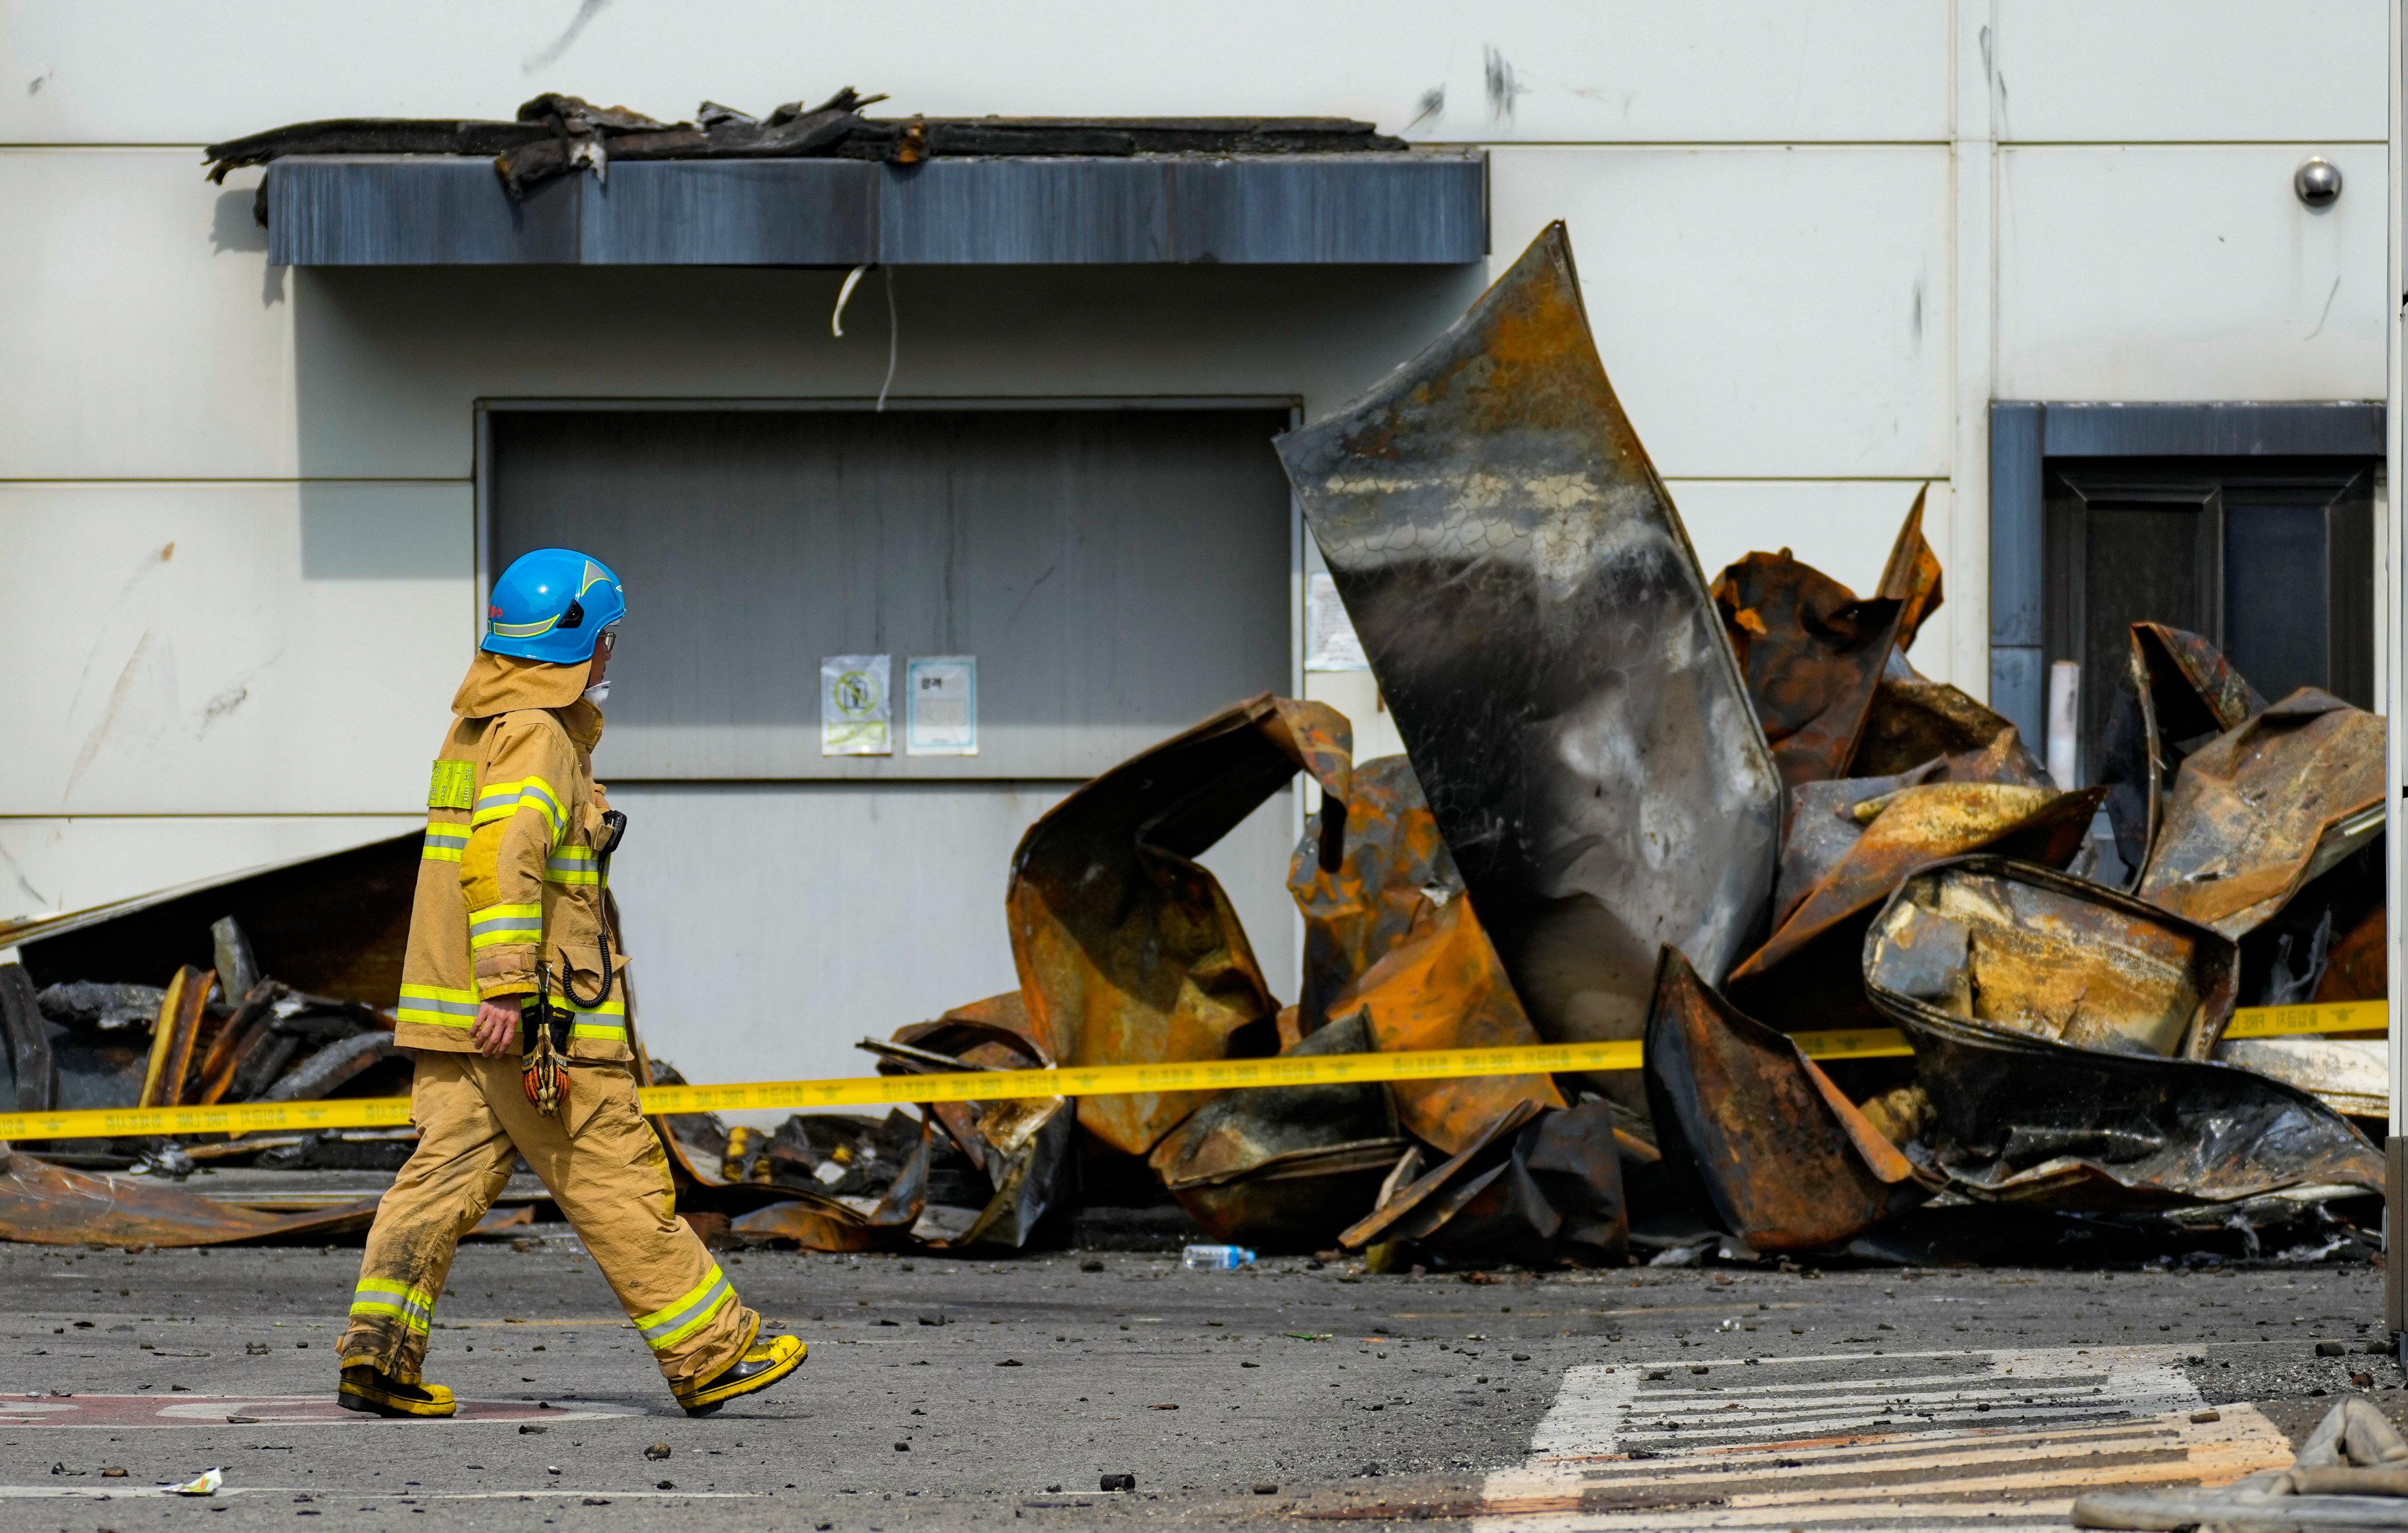 On Tuesday, Korean rescue workers were combing through the charred ruins of a factory building near South Korea’s capital, a day after a devastating blaze likely triggered by exploding lithium batteries killed 23 people, mostly Chinese migrant workers. Photo: AP